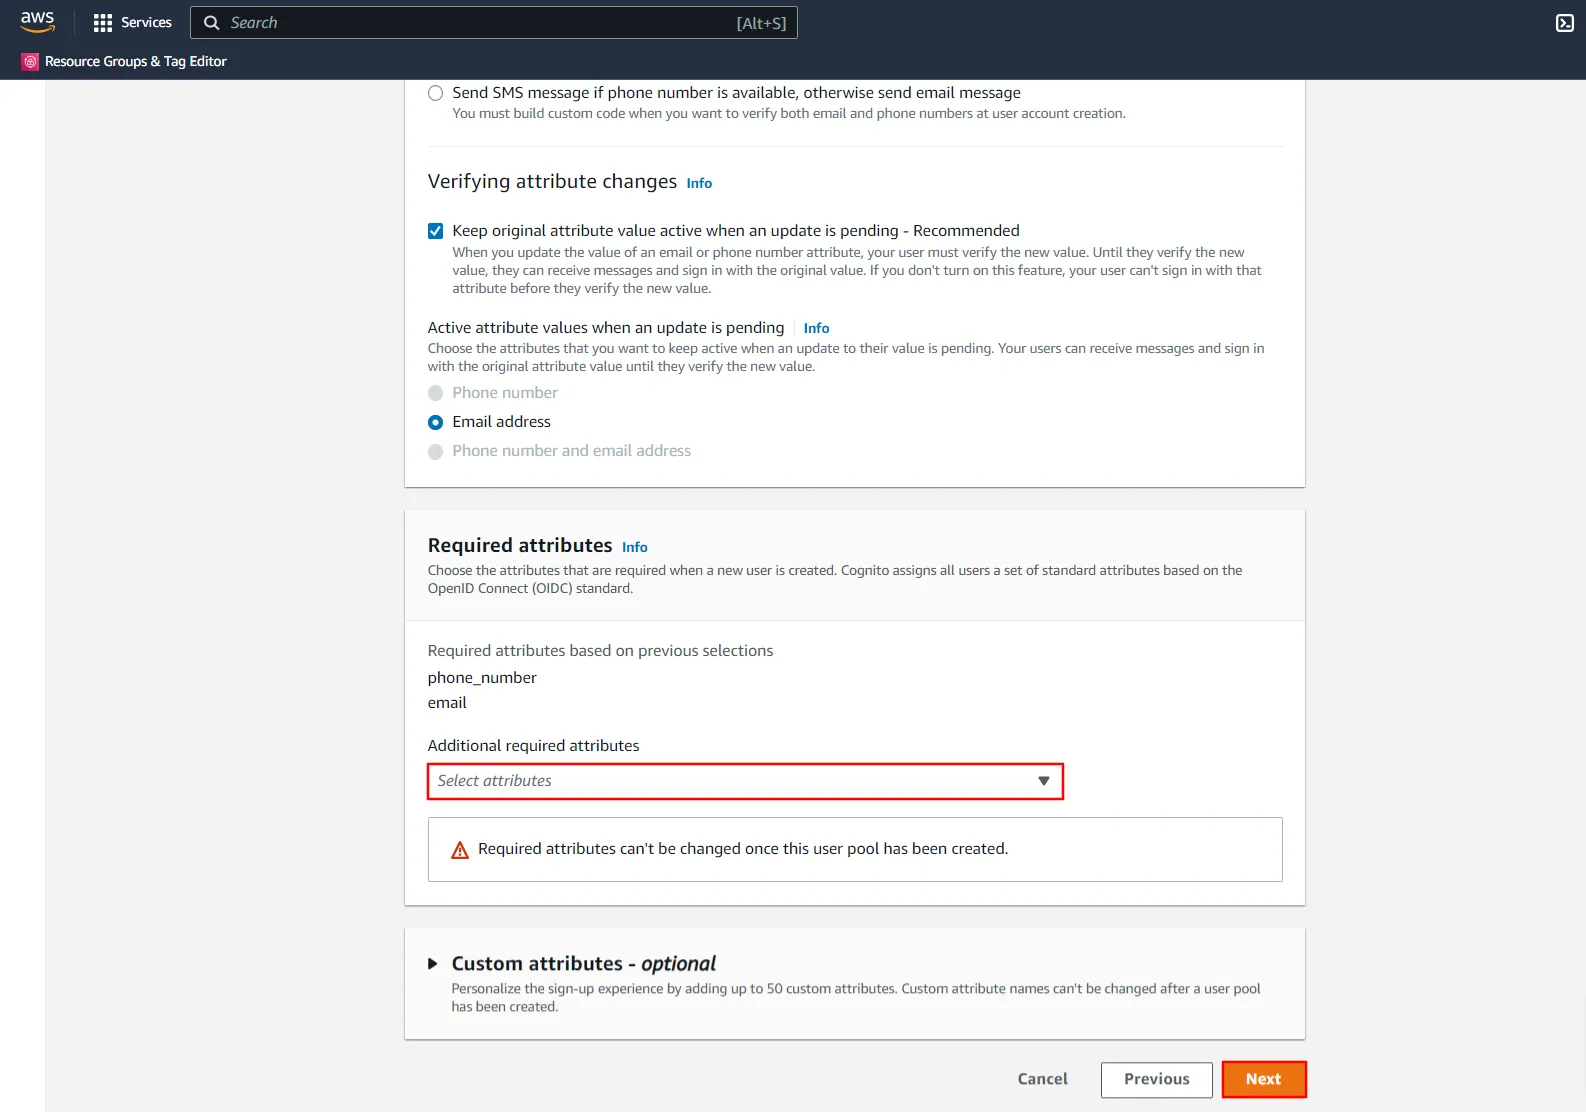 Configure nopCommerce OAuth Single Sign-On (SSO) using Cognito as IDP - configure attributes for user sign up flow 